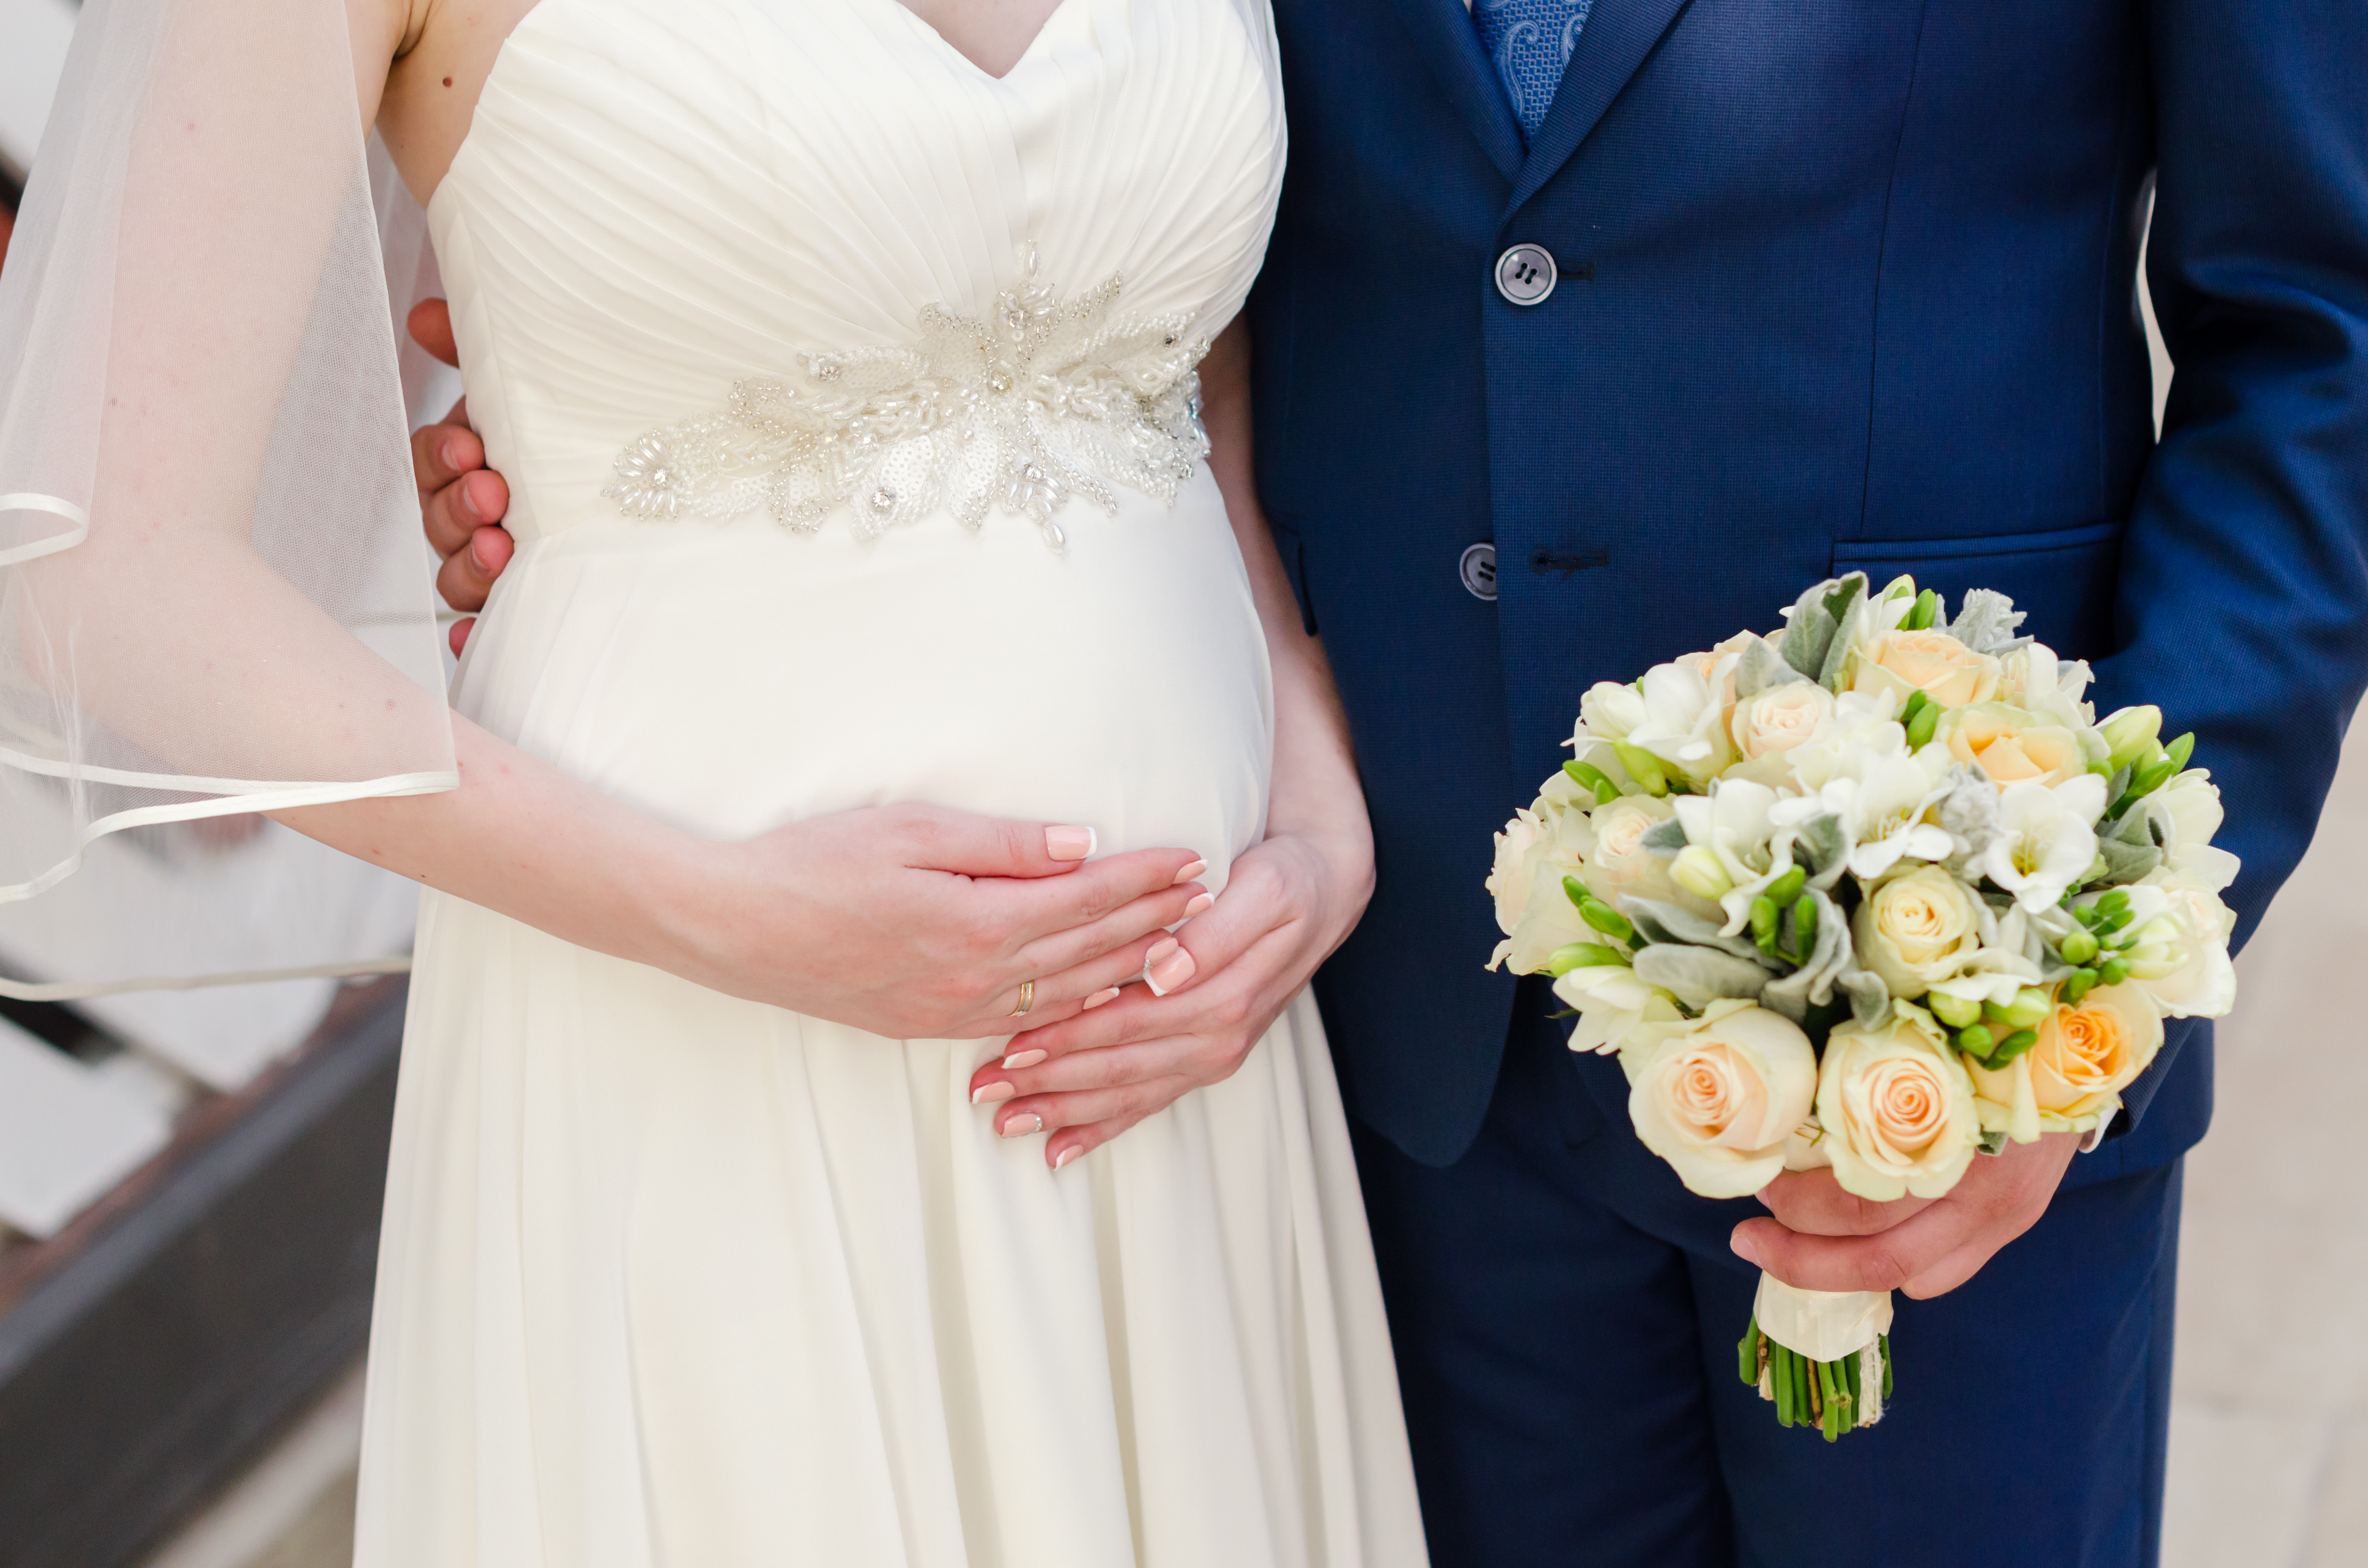 A pregnant bride holds her belly as her groom holds her bouquet | Source: Shutterstock